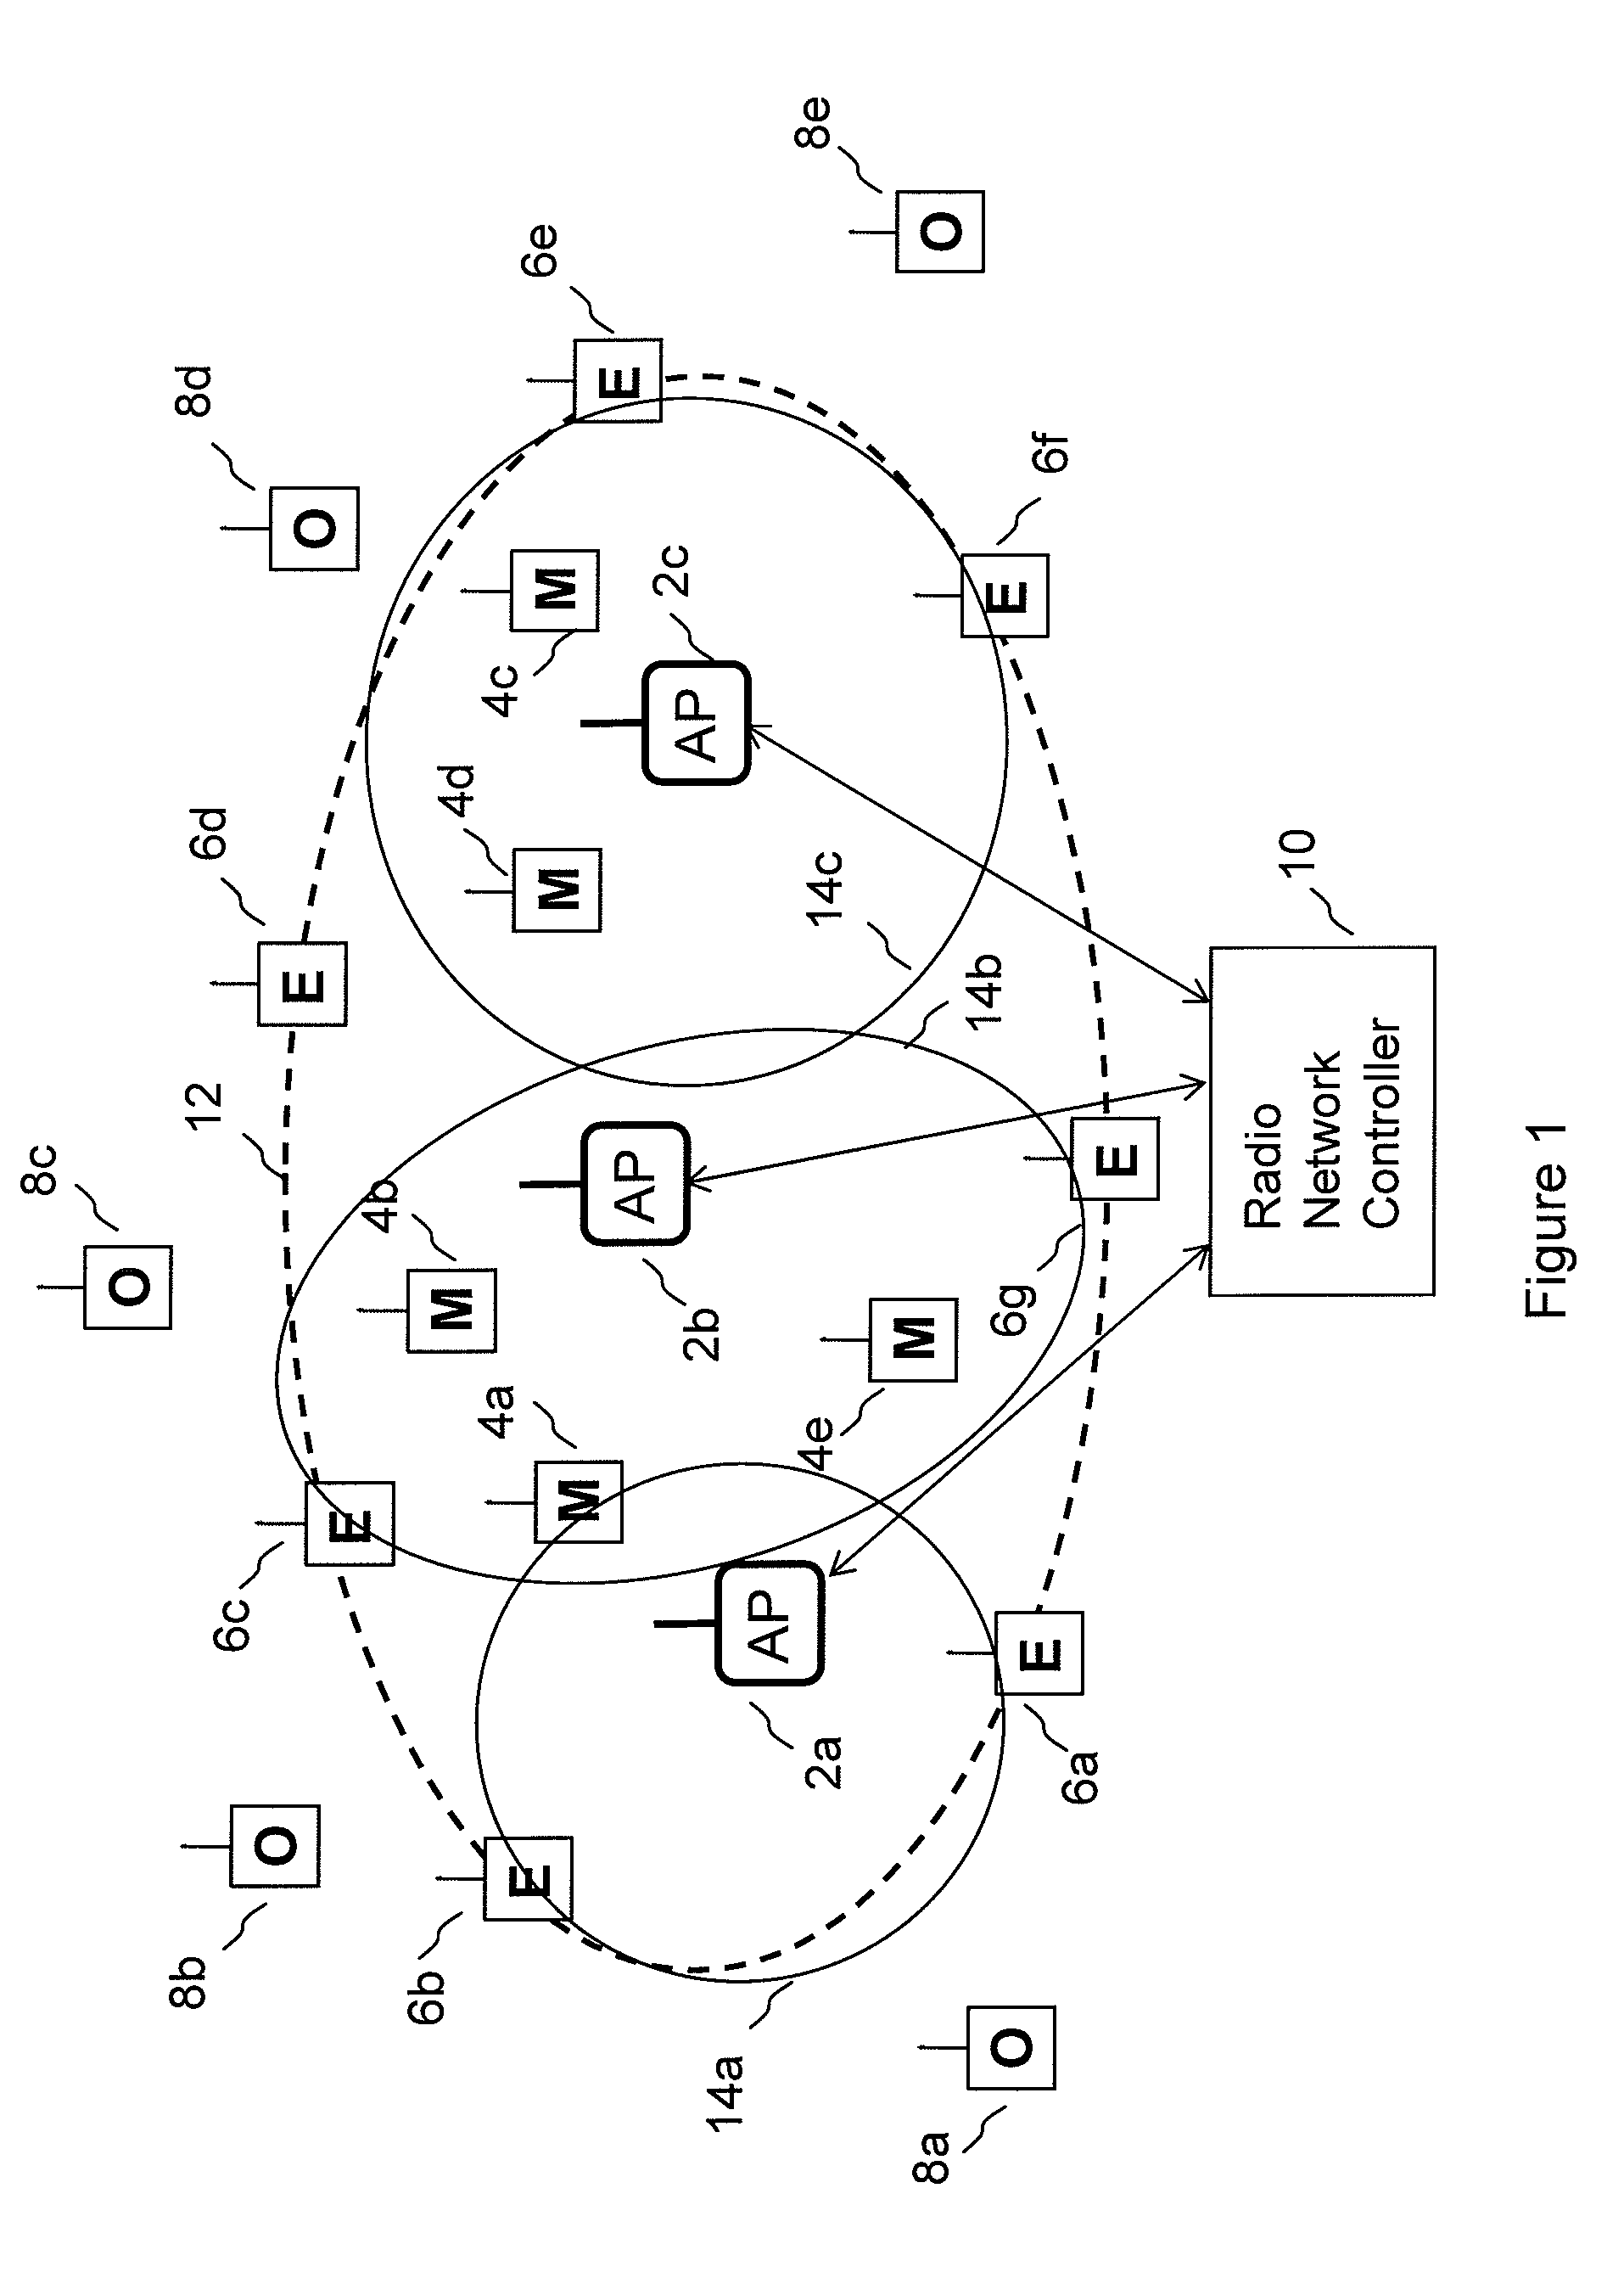 Optimisation of transmission parameters of access points in wireless networks